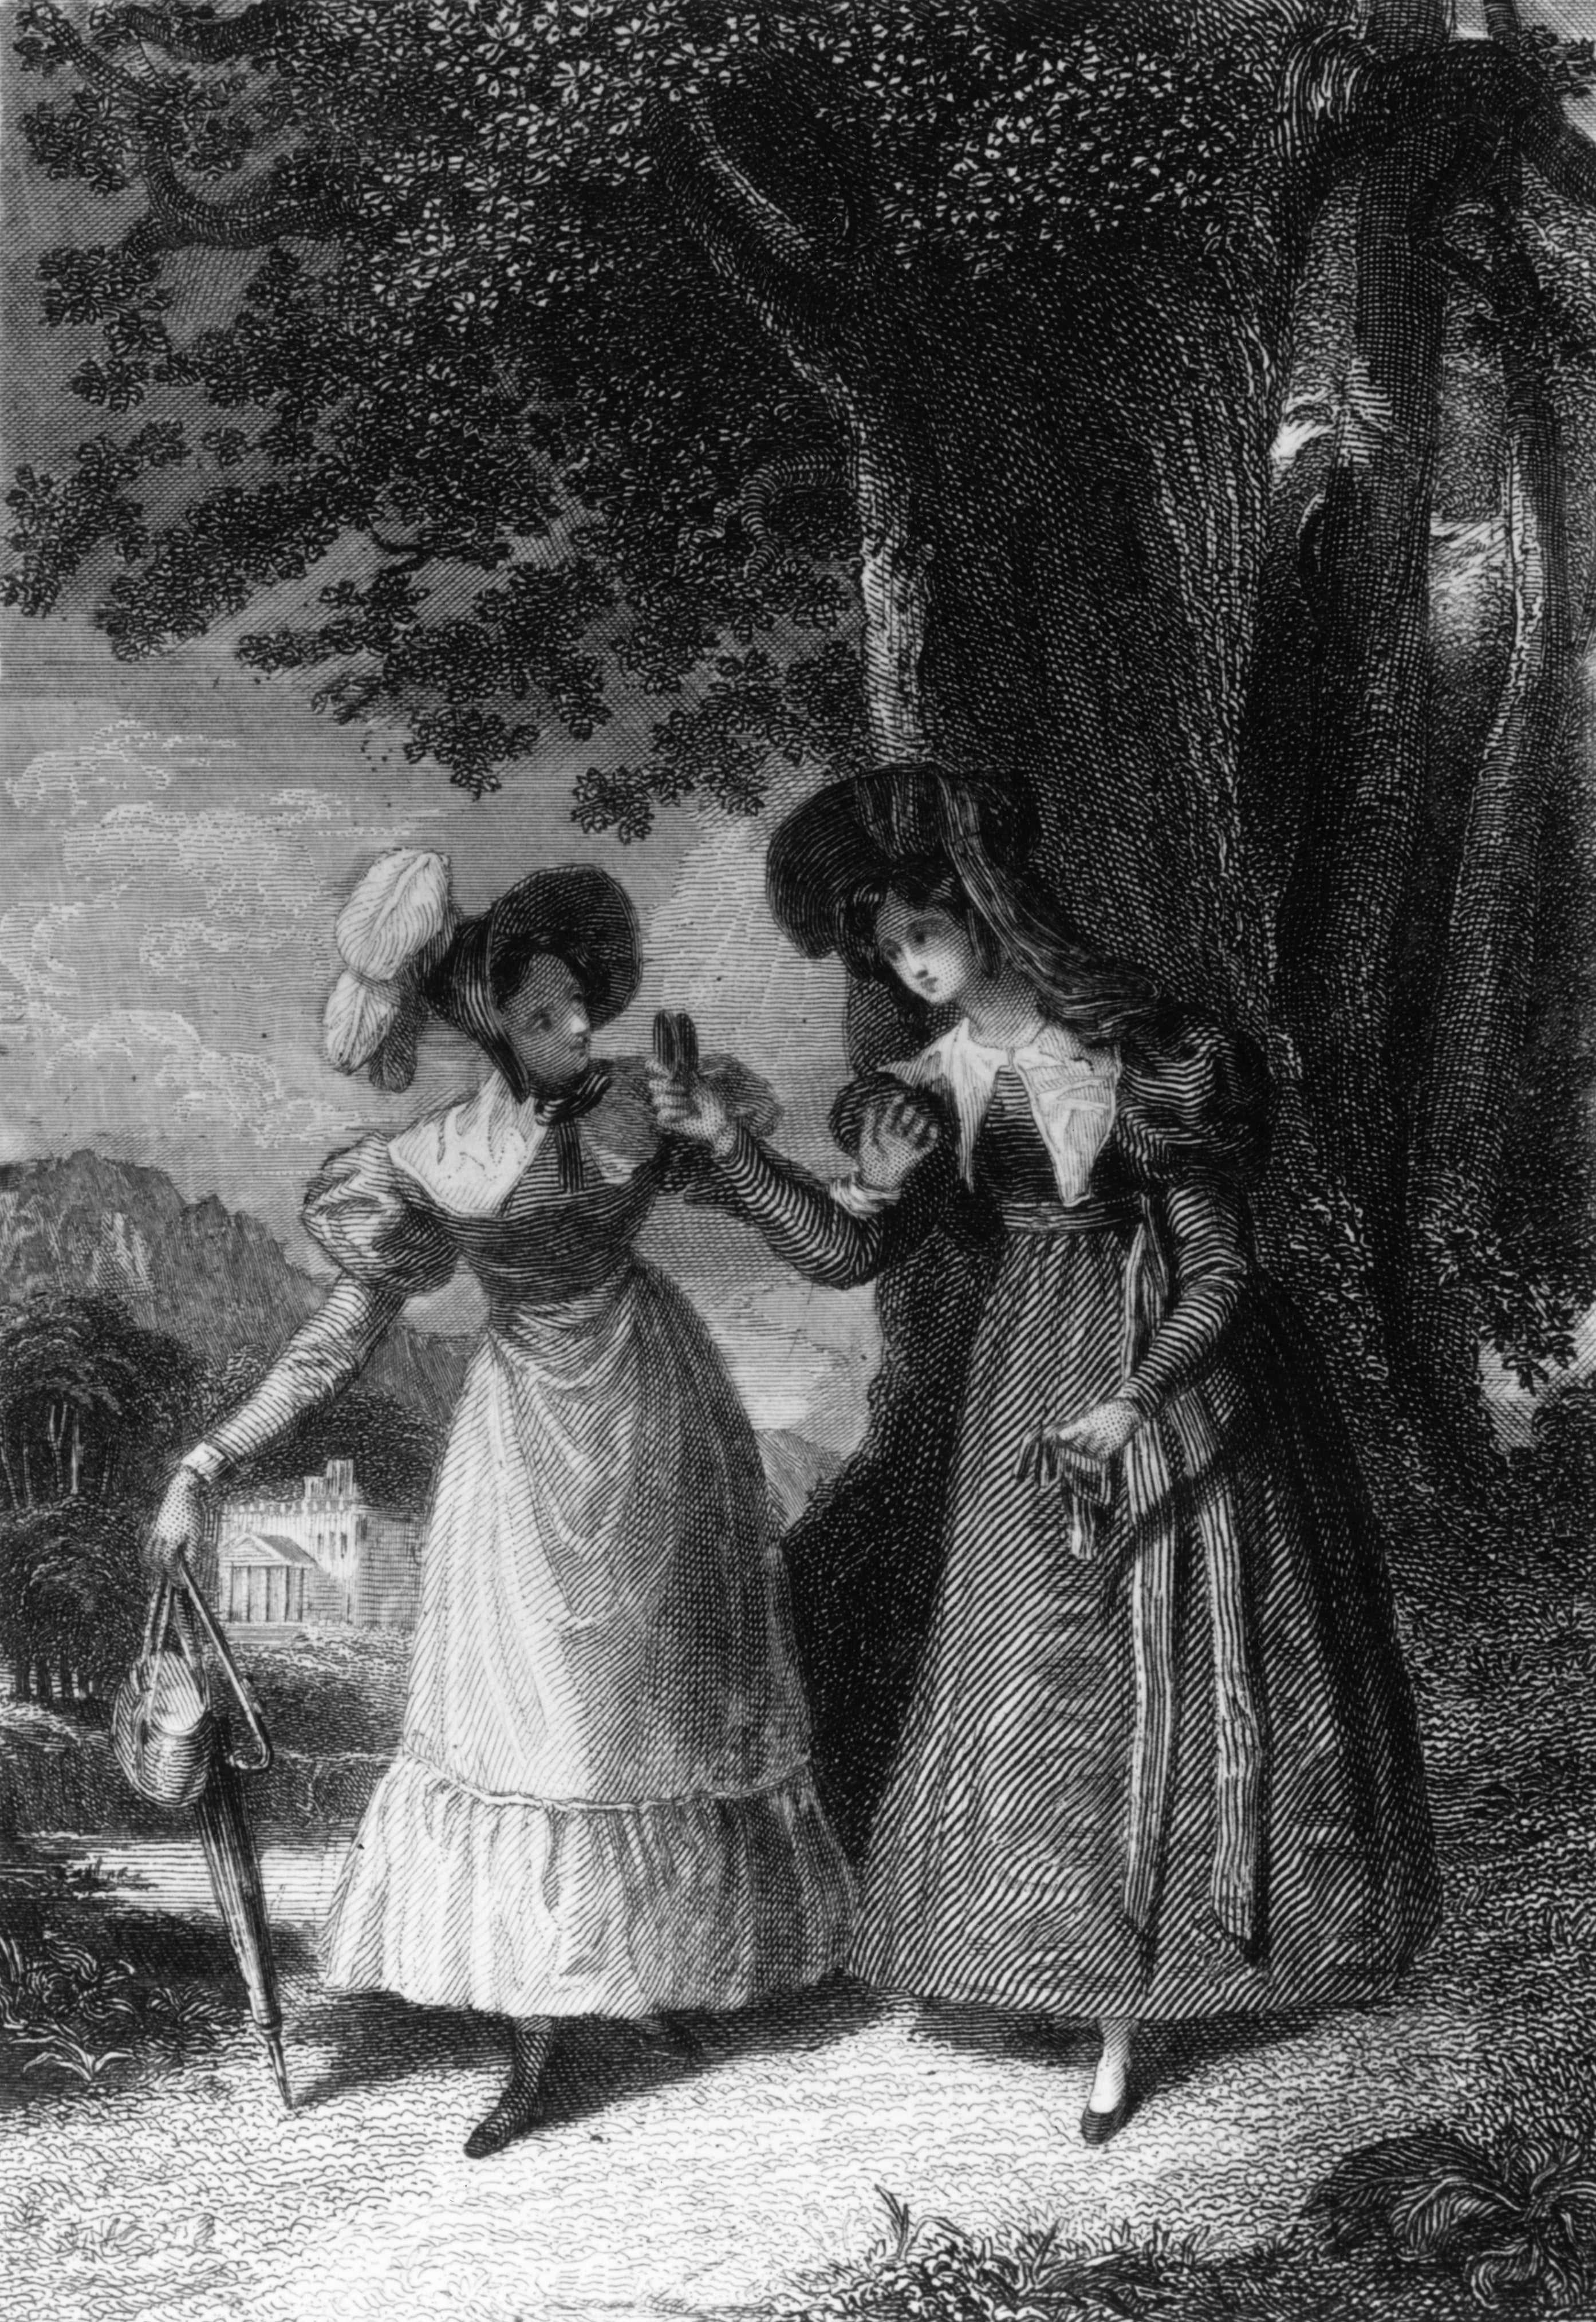 Elinor Dashwood talking to Lucy Steele in a scene from Jane Austen’s ‘Sense and Sensibility’